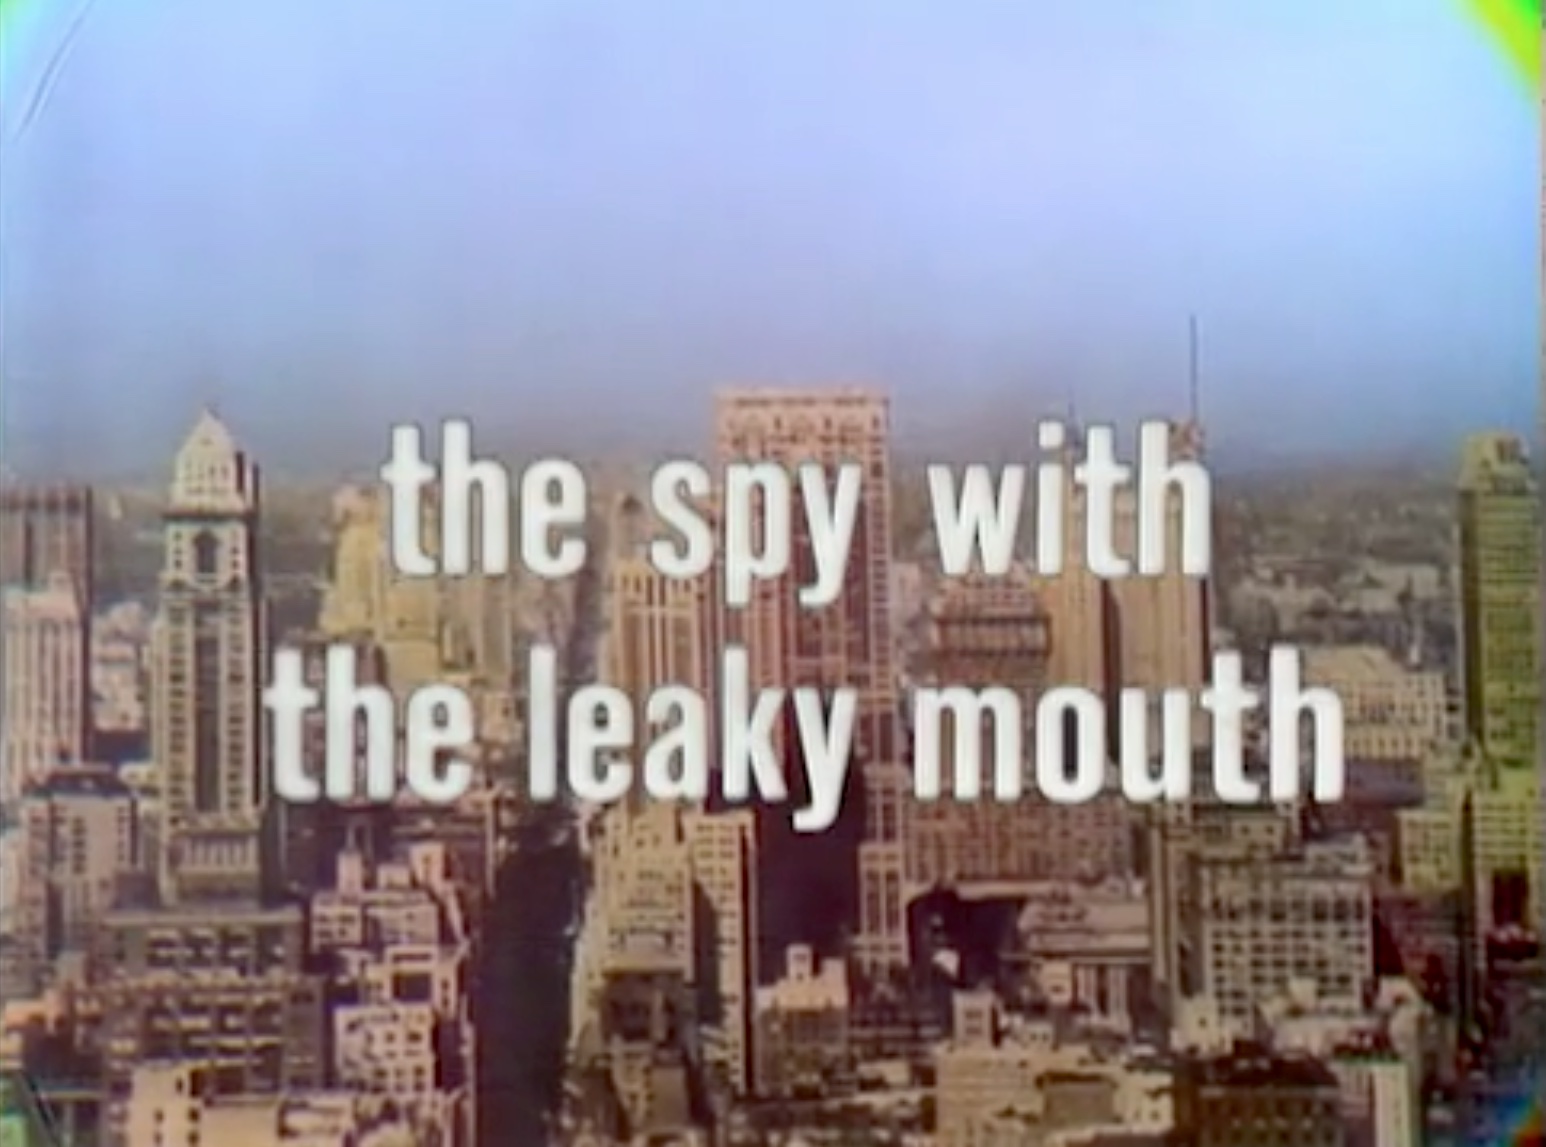 The Spy with the Leaky Mouth, The Red Skelton Hour, season 17, with Godfrey Cambridge